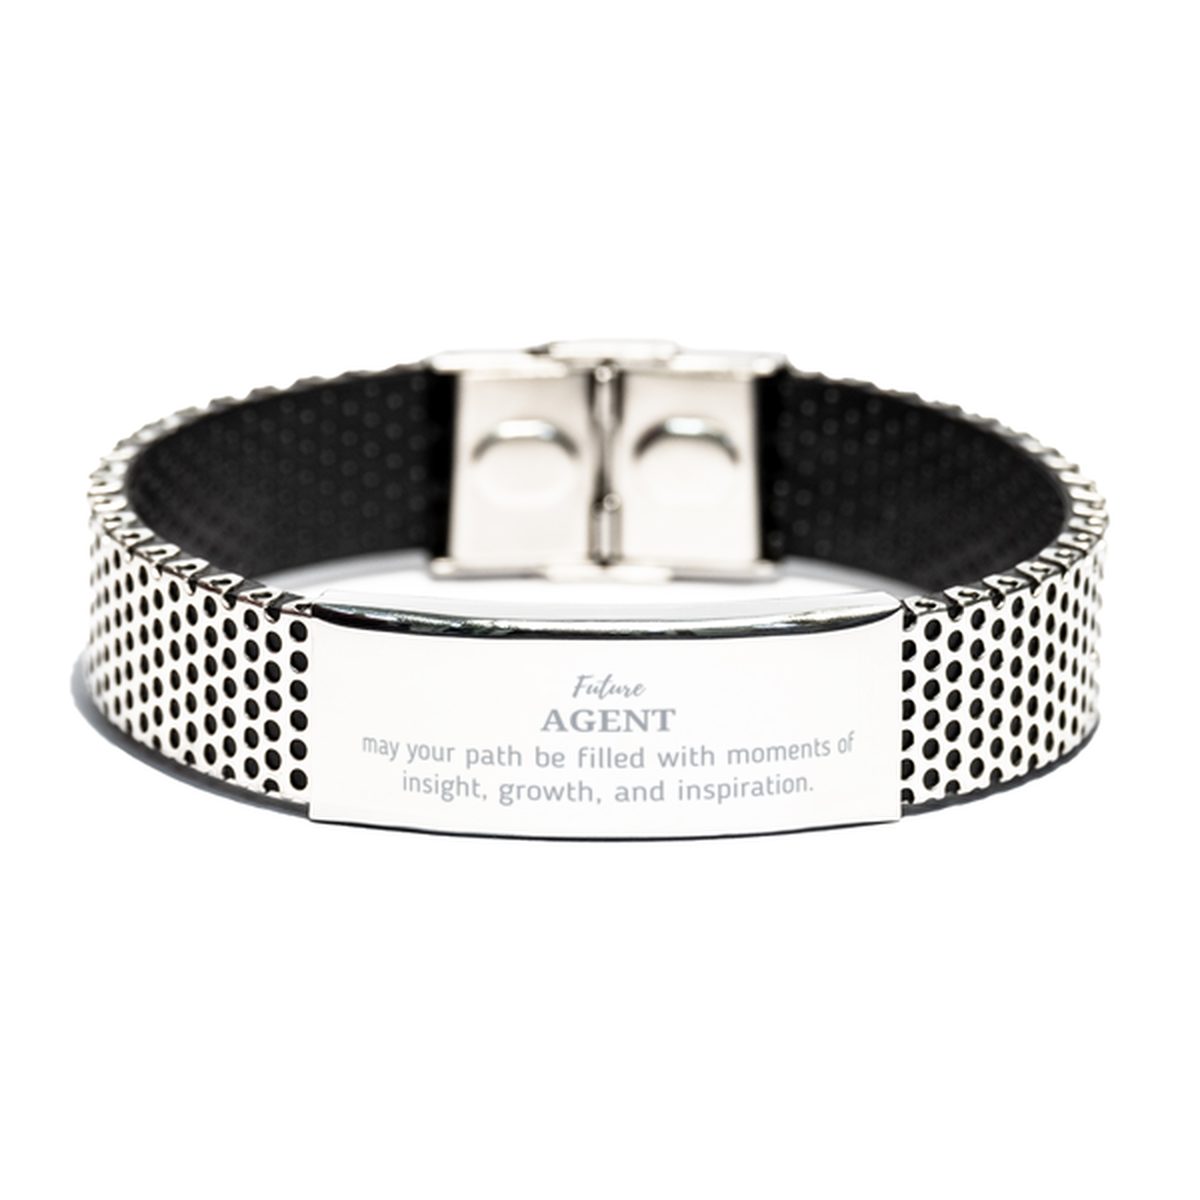 Future Agent Gifts, May your path be filled with moments of insight, Graduation Gifts for New Agent, Christmas Unique Stainless Steel Bracelet For Men, Women, Friends